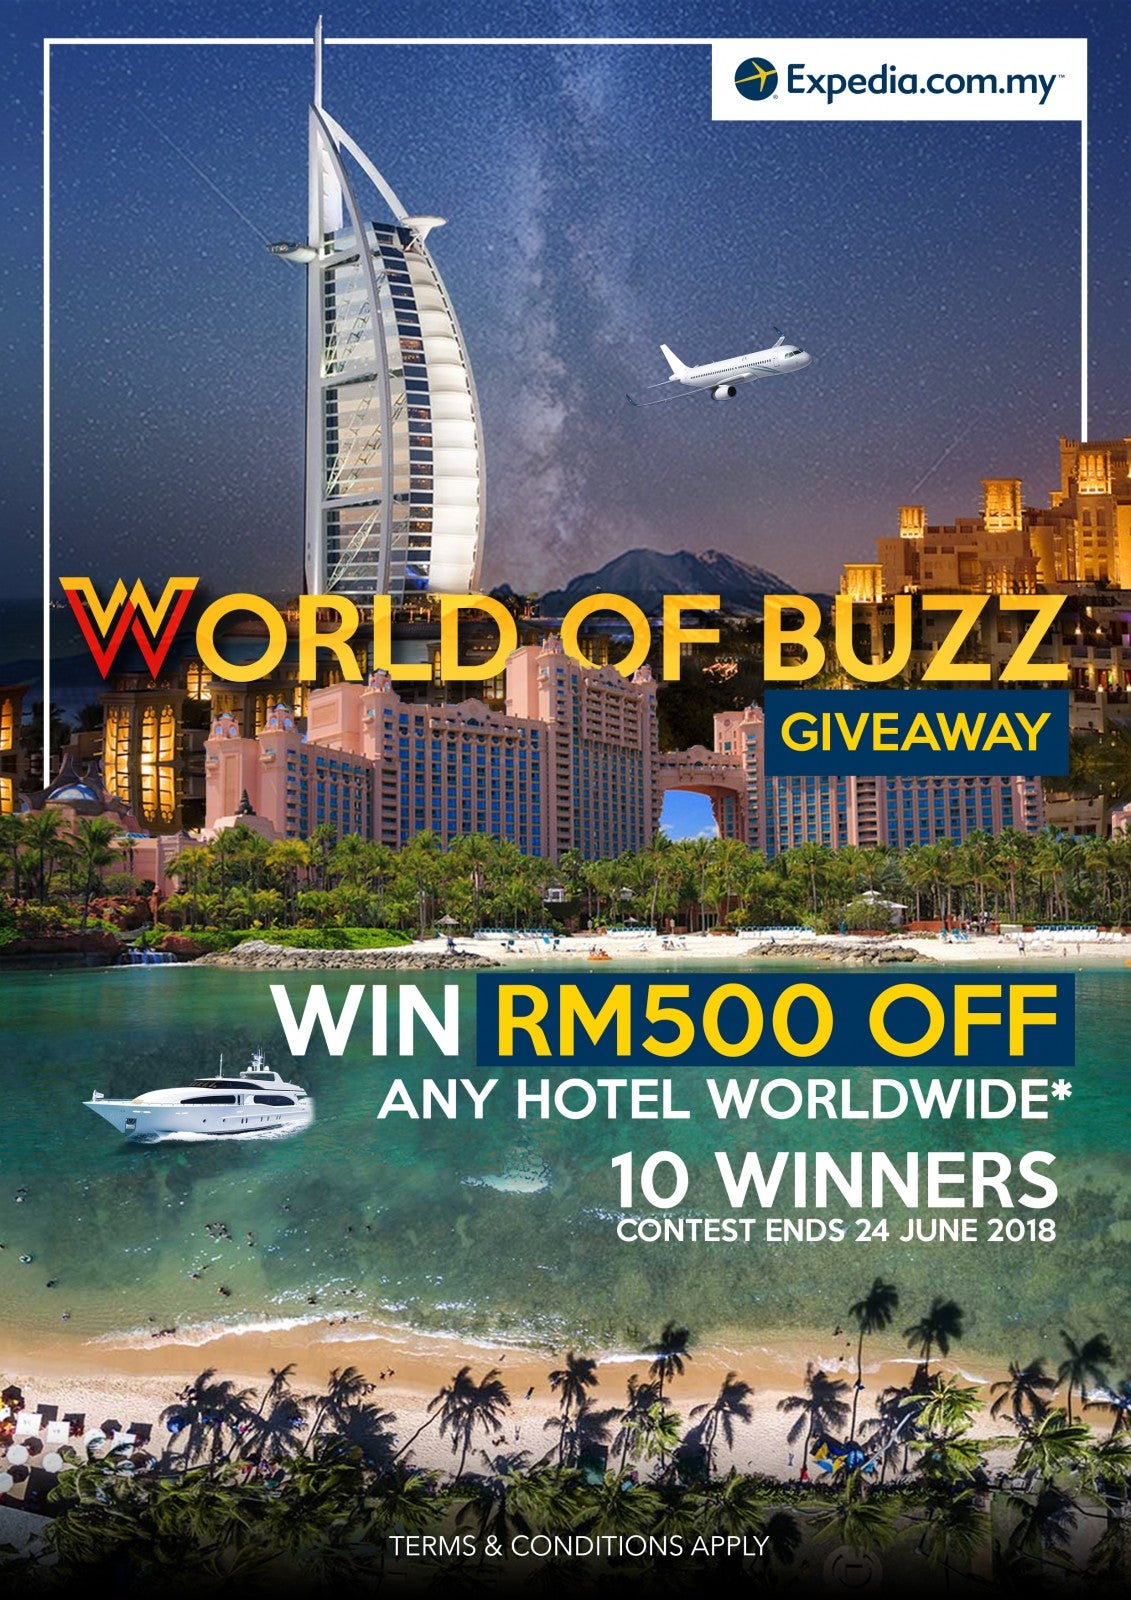 [TEST] In Need of a Vacay? Here's How You Can Win RM500 Off Hotels WORLDWIDE! - WORLD OF BUZZ